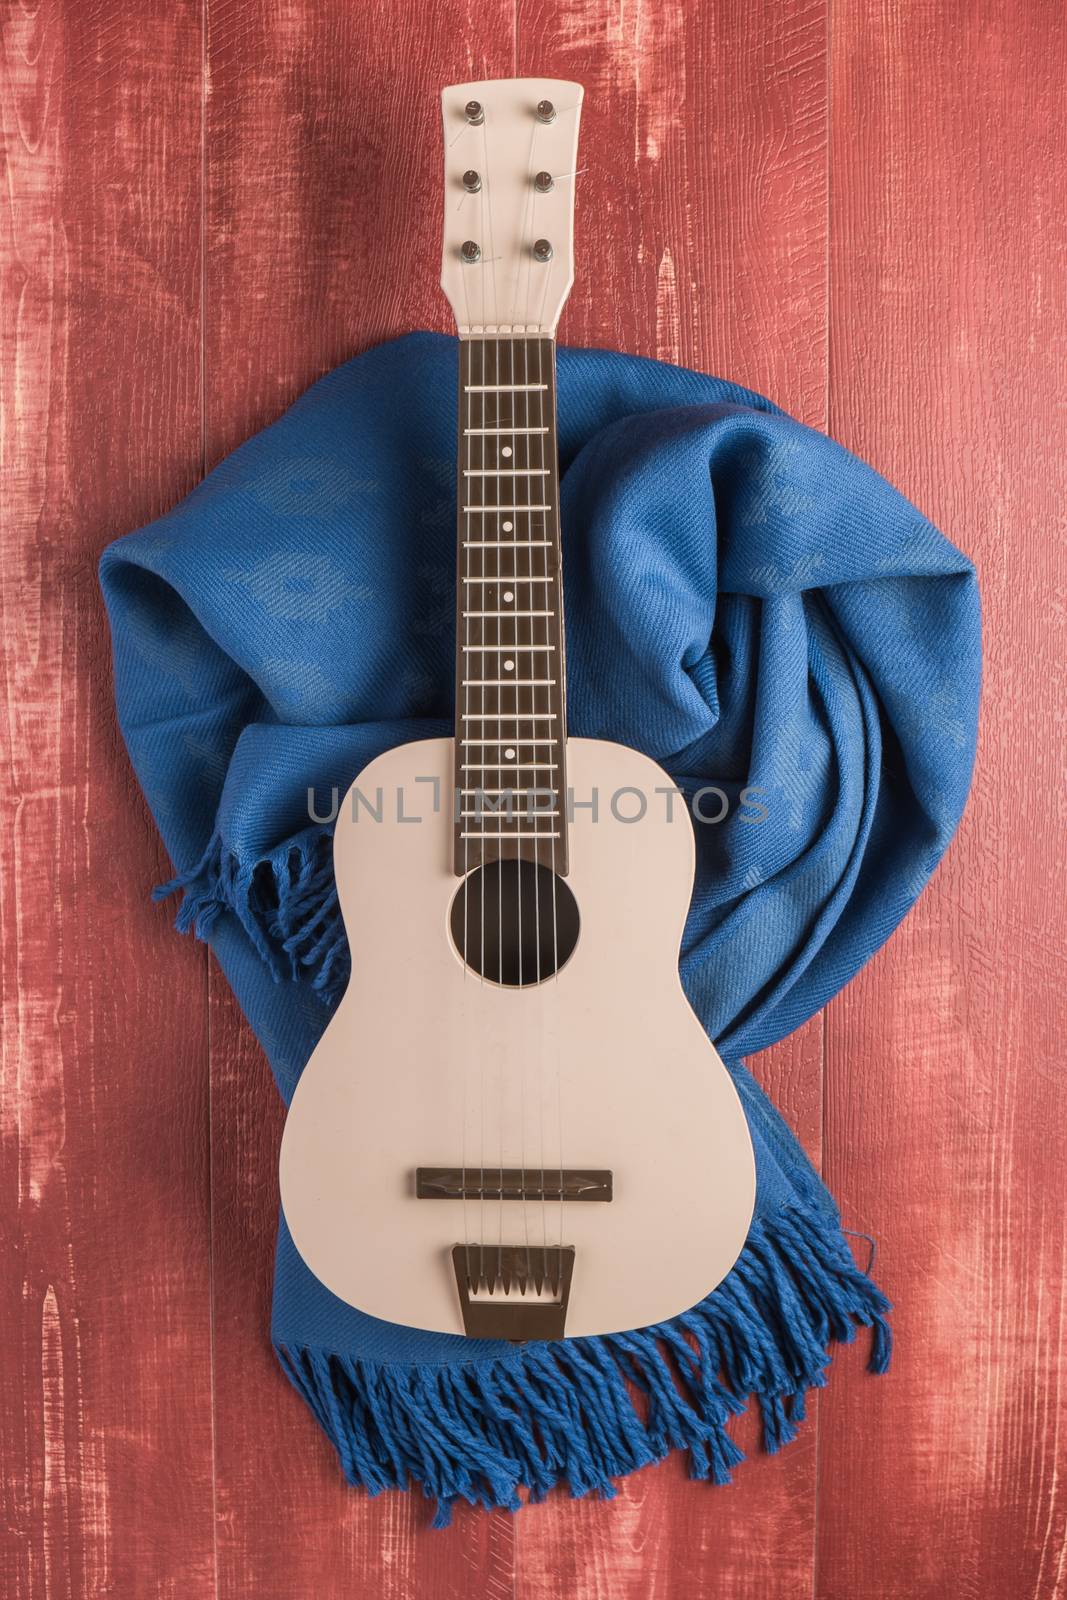 Guitar and blanket on rustic wooden background texture by AnaMarques